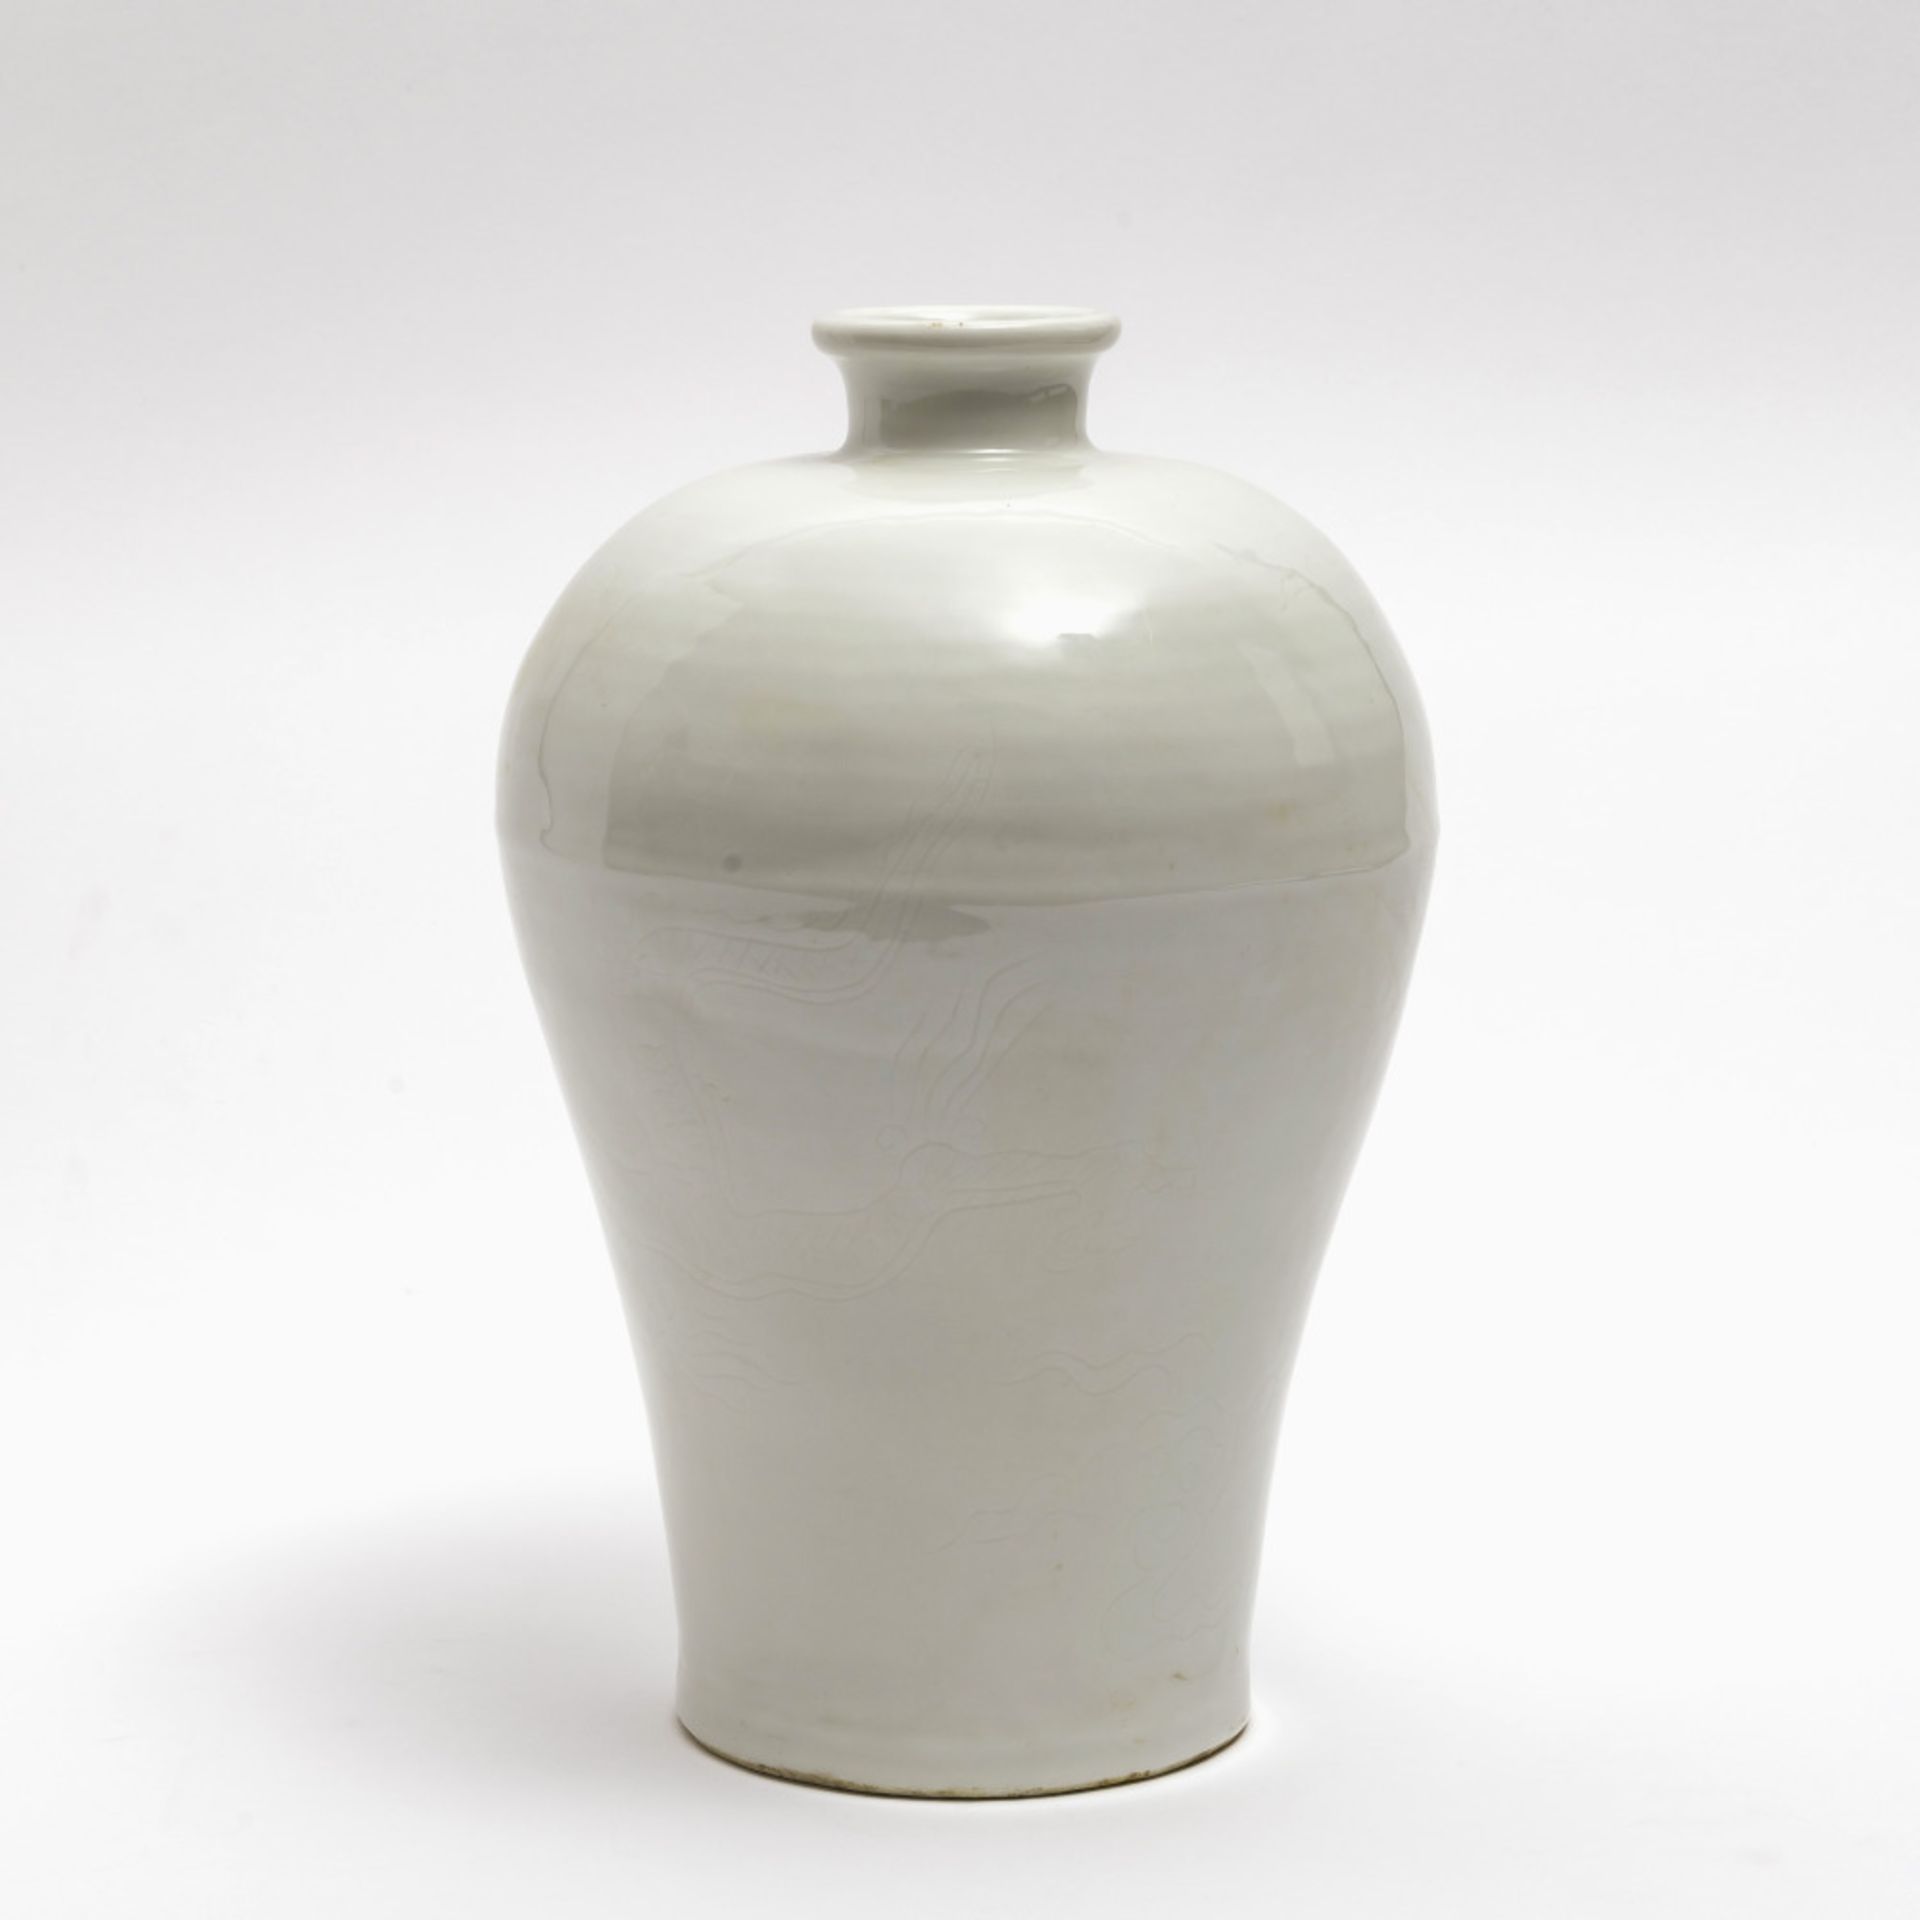 A Meiping vase - China, 18th/19th century 